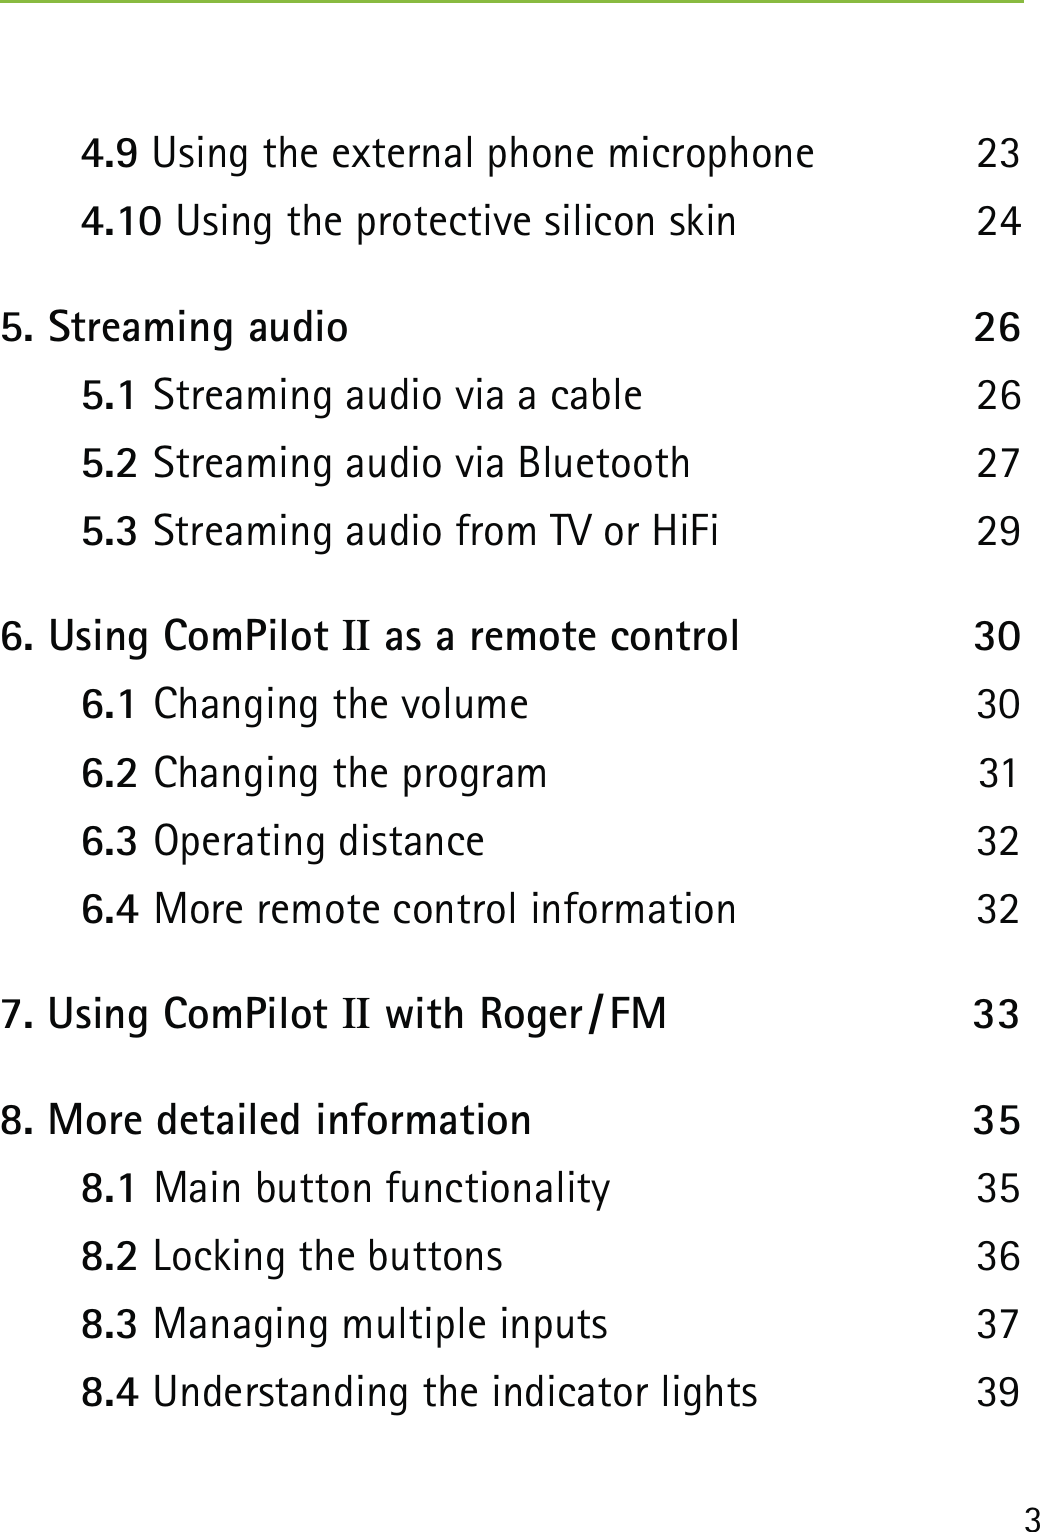 3  4.9 Using the external phone microphone  23  4.10 Using the protective silicon skin  245.  Streaming audio  26  5.1 Streaming audio via a cable  26  5.2 Streaming audio via Bluetooth  27  5.3 Streaming audio from TV or HiFi  296.  Using ComPilot II as a remote control  30  6.1 Changing the volume  30  6.2 Changing the program  31  6.3 Operating distance  32  6.4 More remote control information  327.  Using ComPilot II with Roger / FM  338.  More detailed information  35  8.1 Main button functionality  35  8.2 Locking the buttons  36  8.3 Managing multiple inputs  37  8.4 Understanding the indicator lights  39